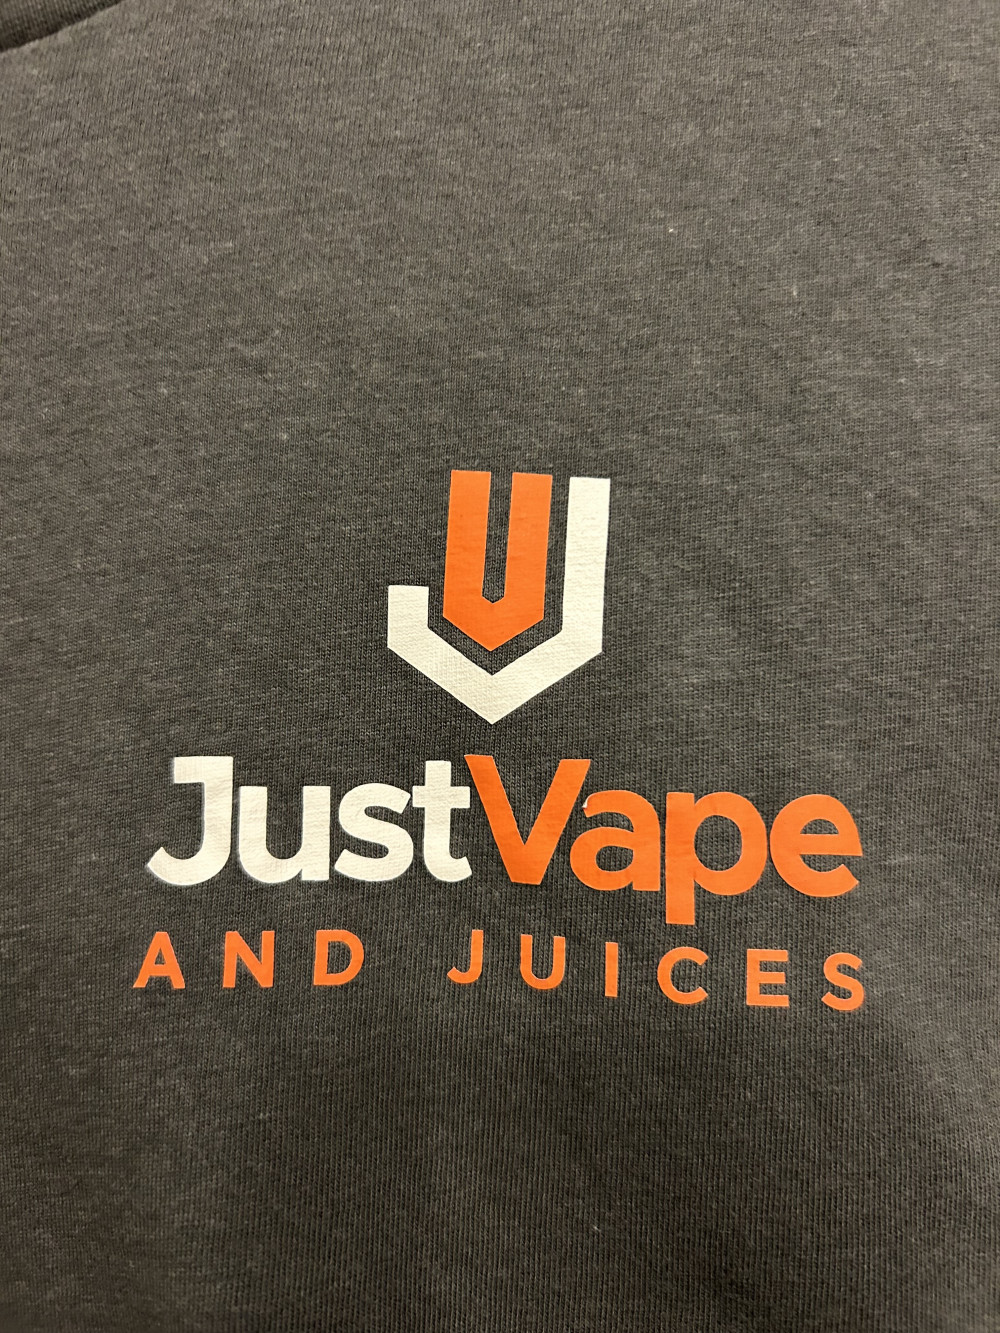 Just Vape and Juices